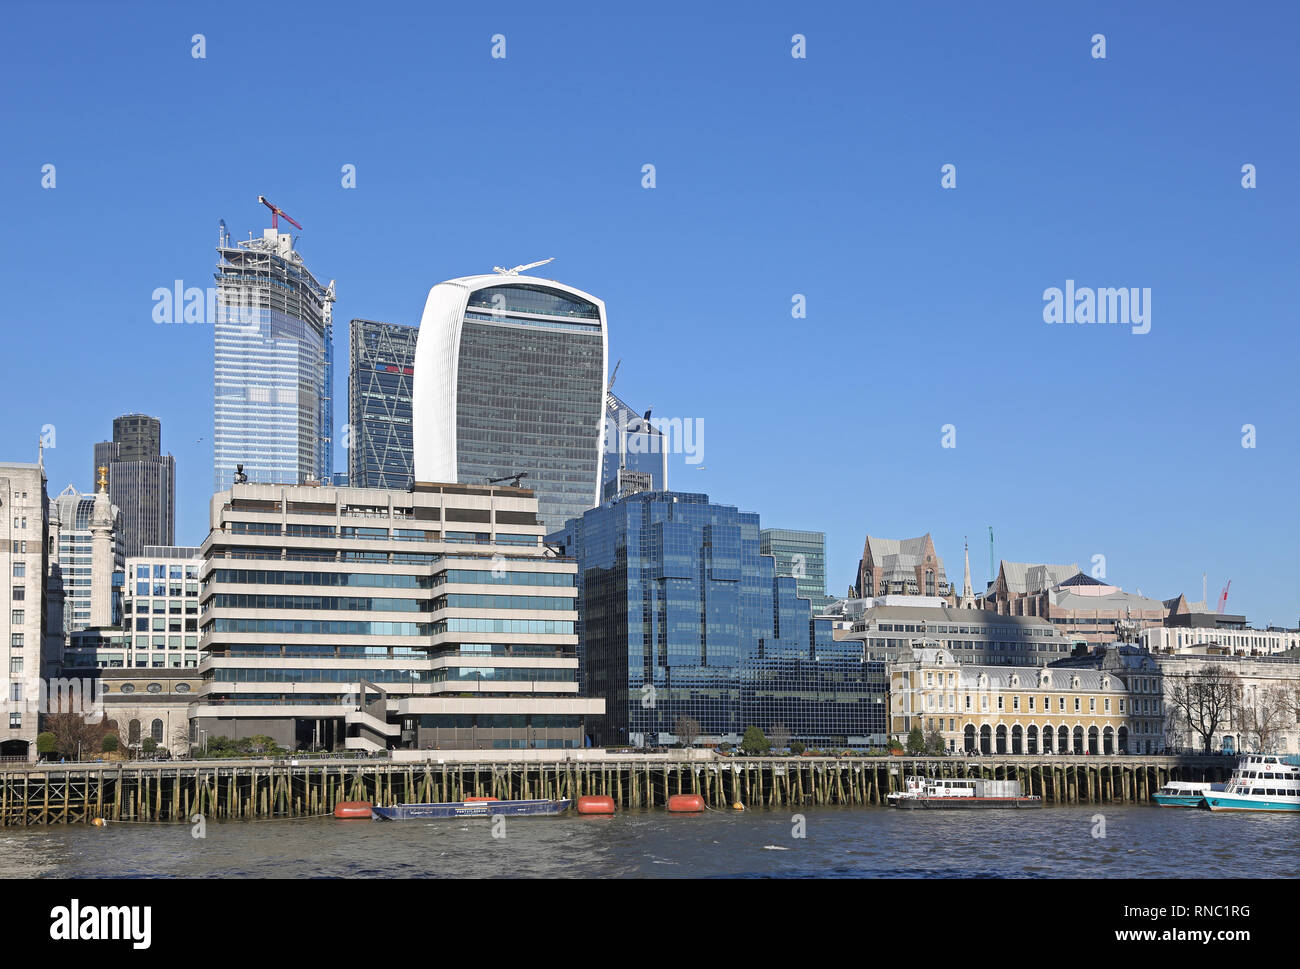 London city skyline from the south bank of the River Thames. Shows the 'Walkie-Talkie' centre, ld Billingsgate fis]h market to the right. Stock Photo